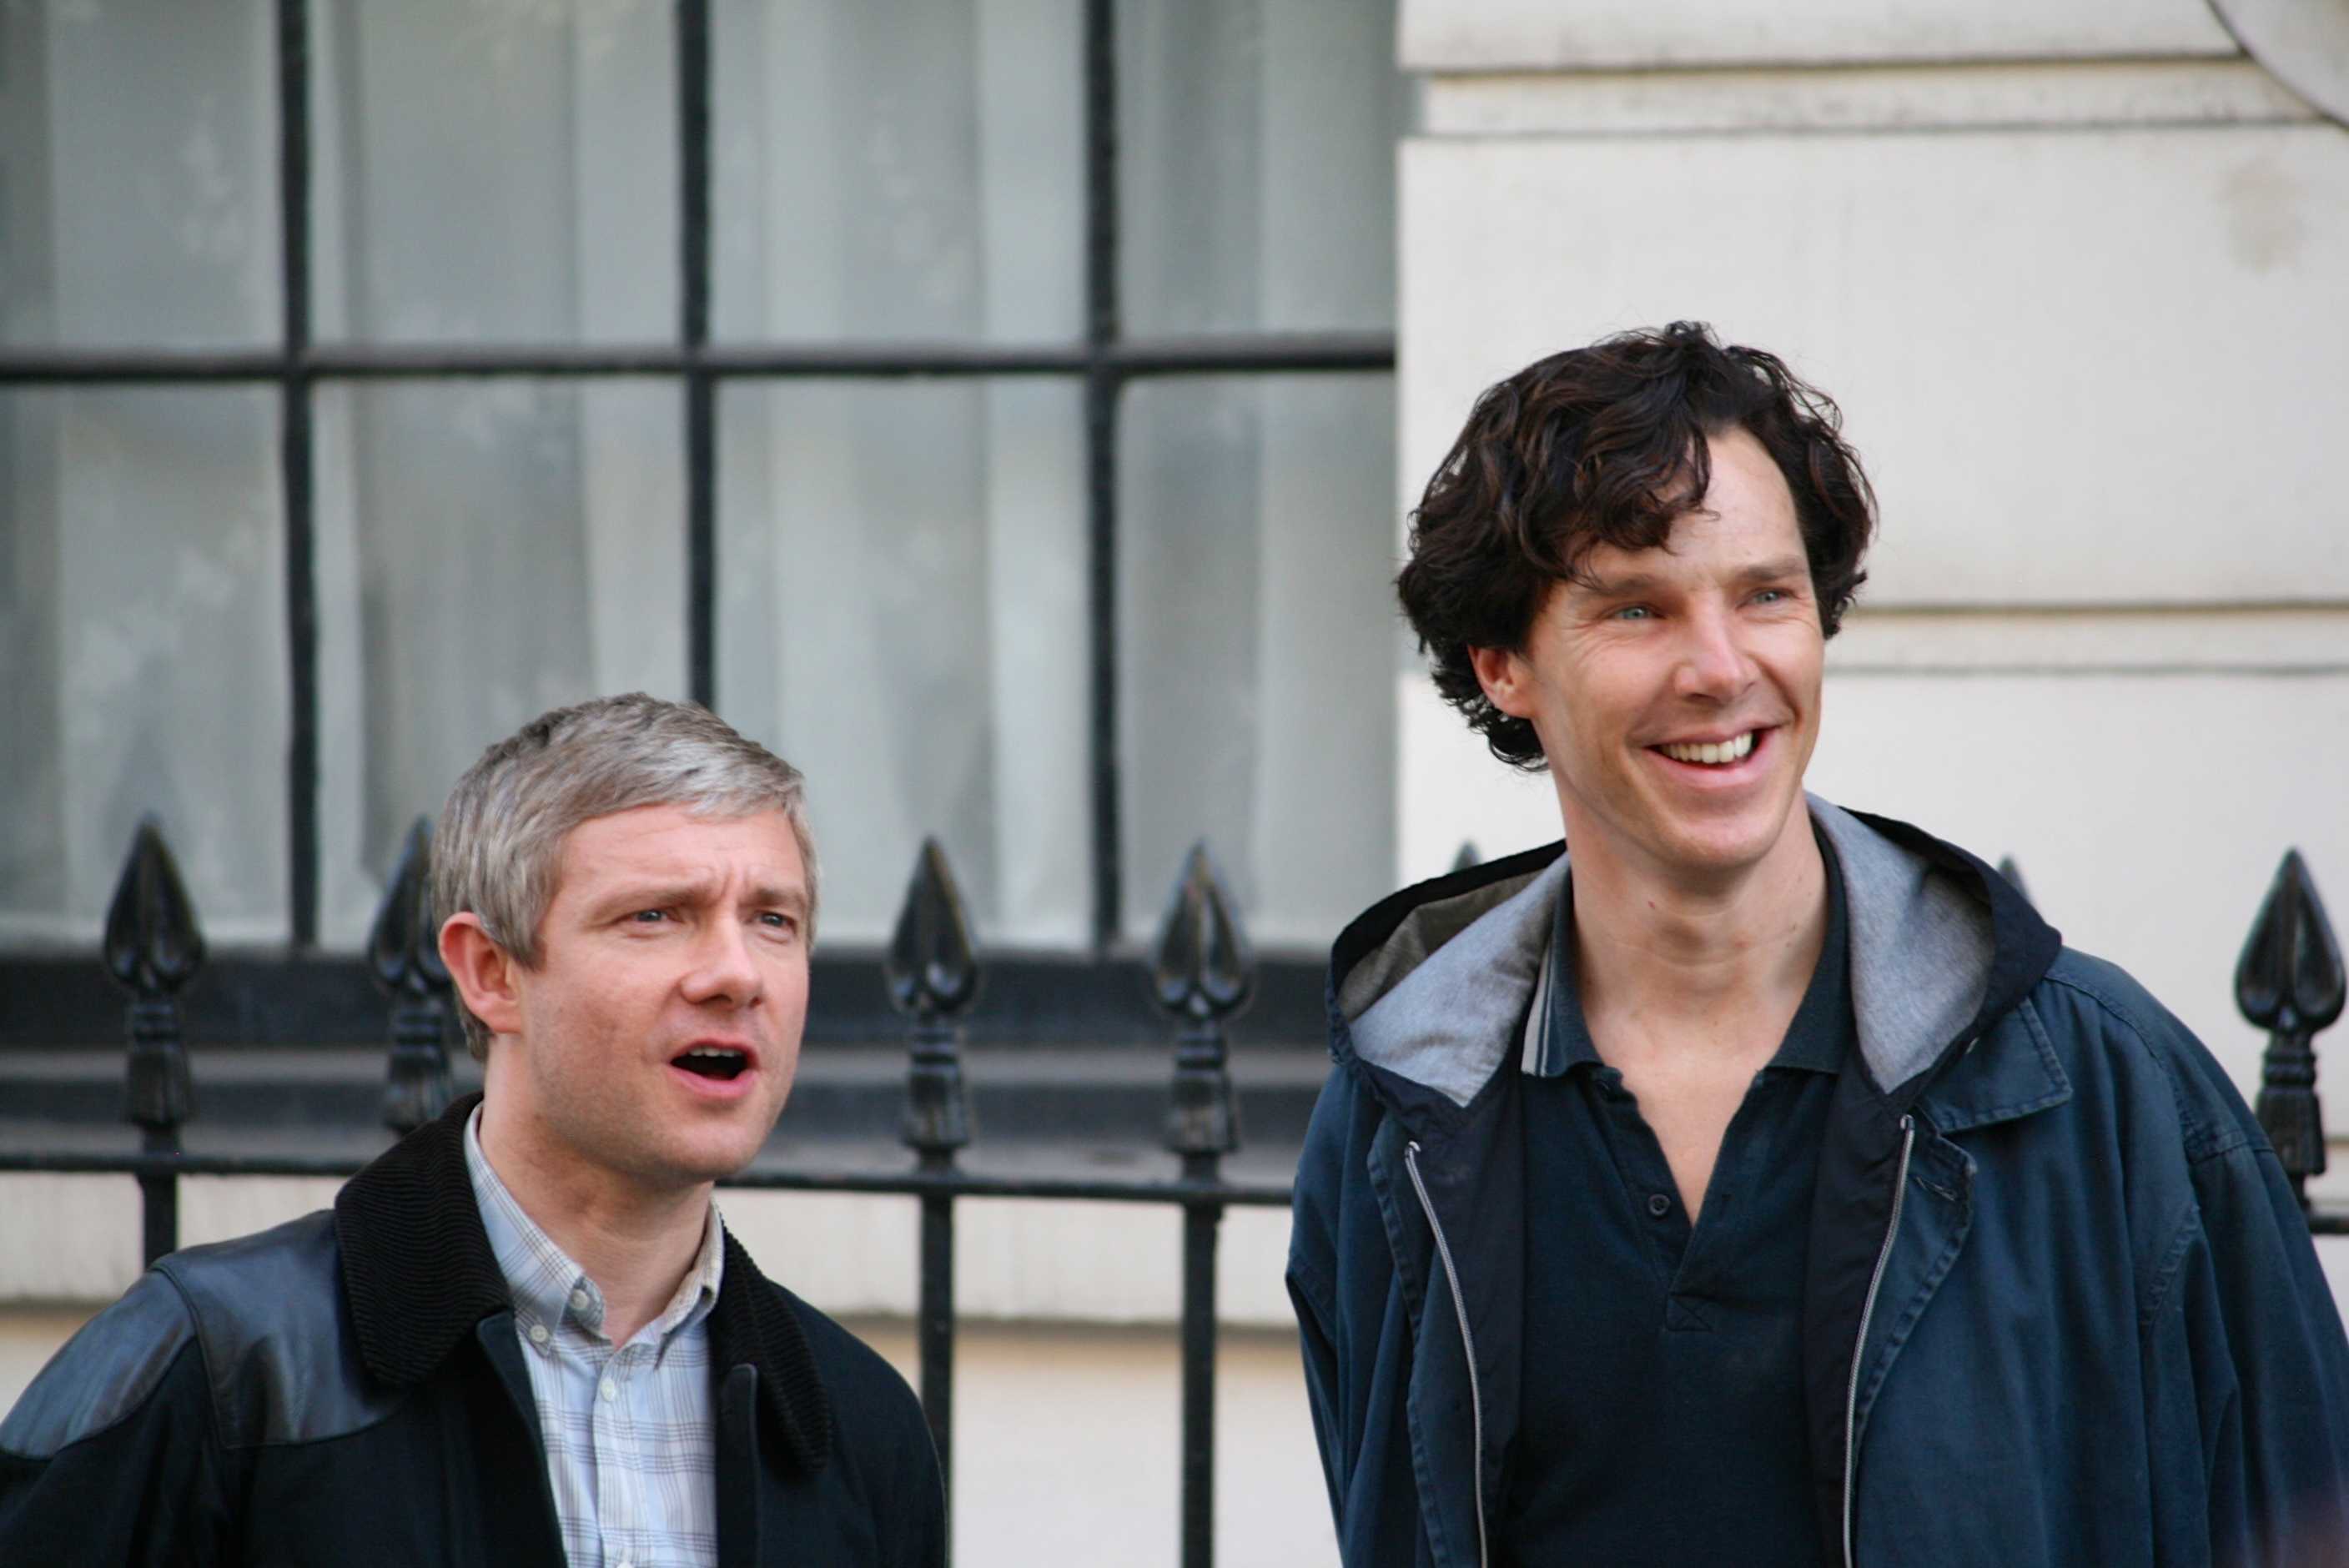 'Martin and Benedict, please come back?': 'Sherlock's' creator eagerly awaits Martin Freeman and Benedict Cumberbatch's decision for season 5